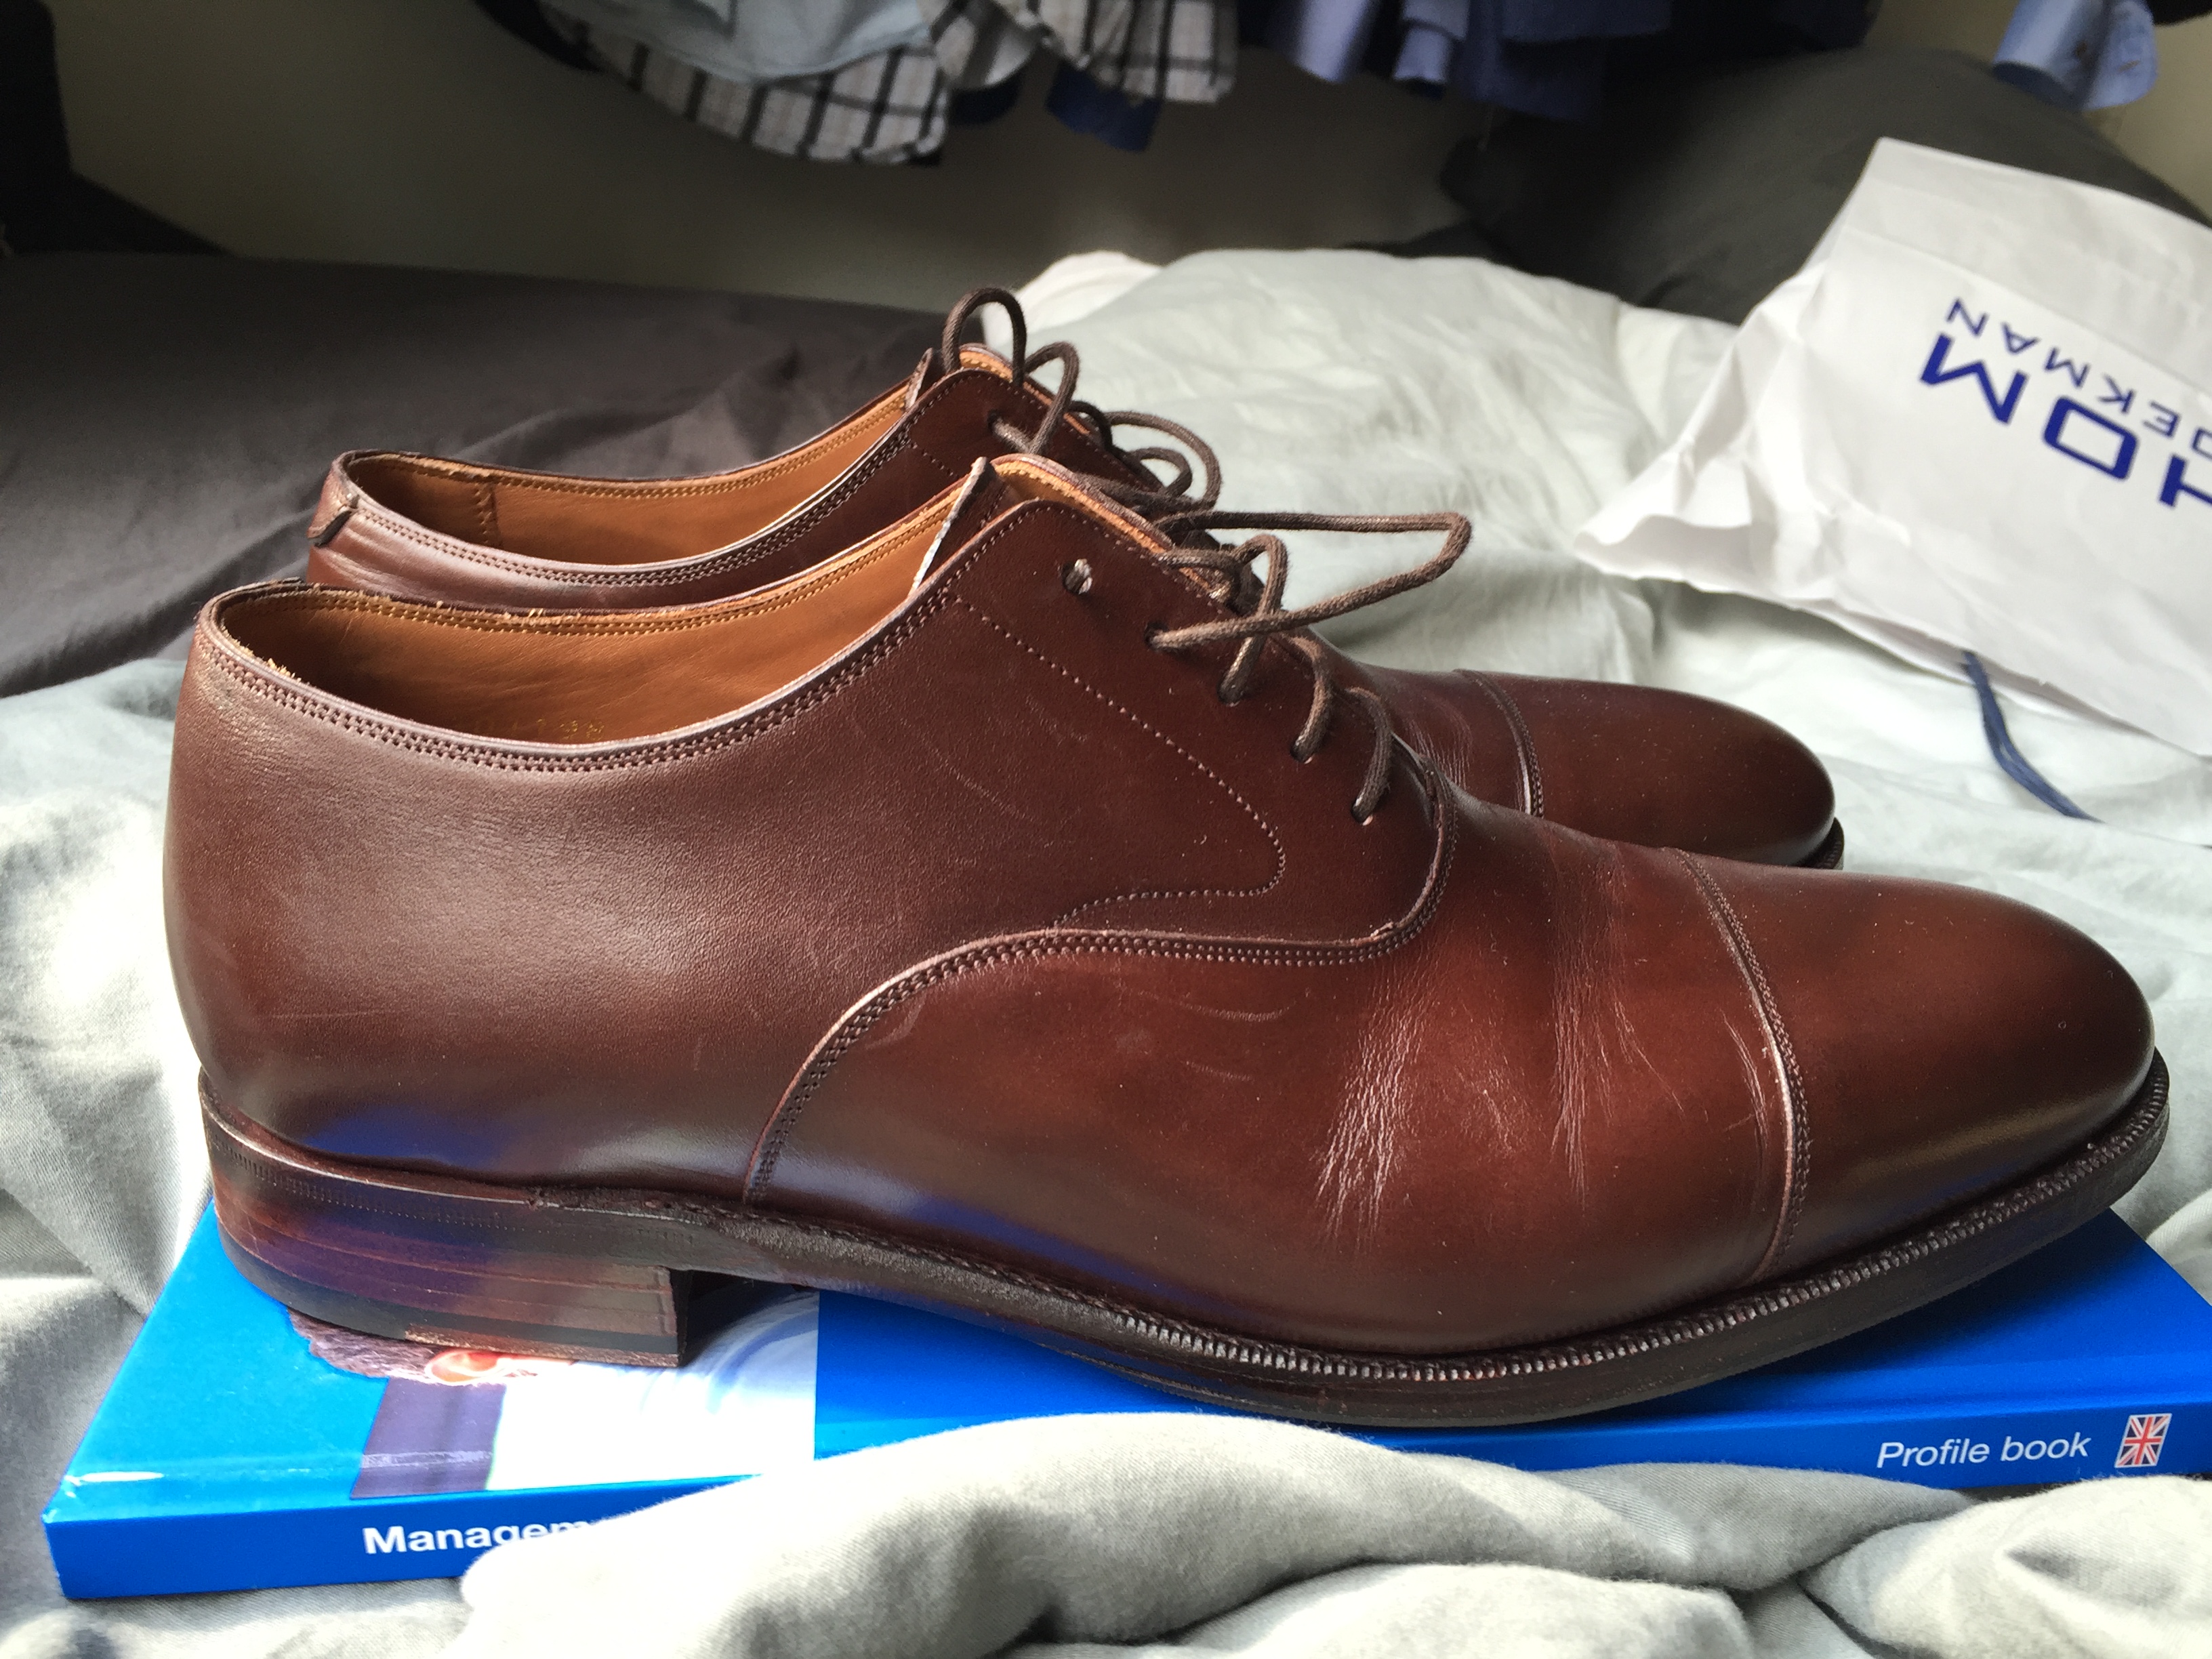 101198 - BROWN SUEDE - E – Meermin Shoes